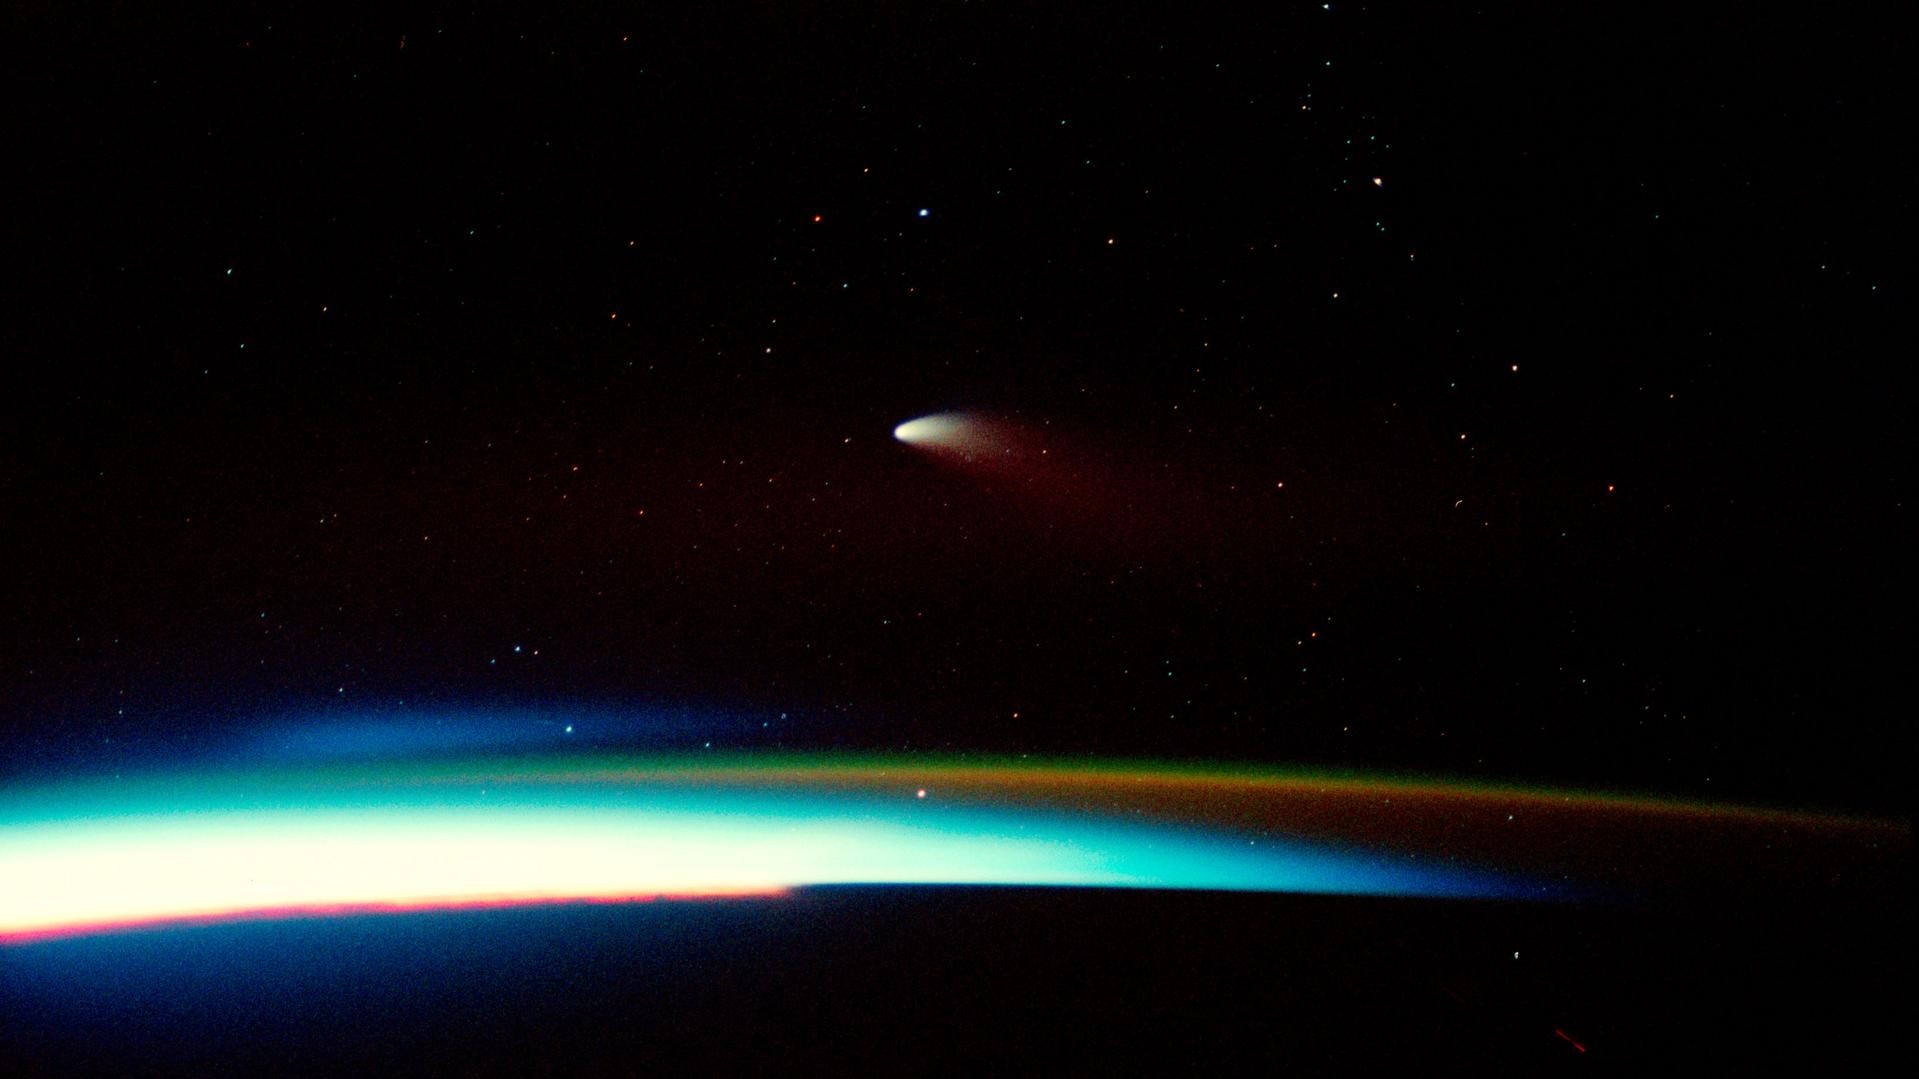 The Hale-Bopp comet was spotted during NASA's STS-83 mission.